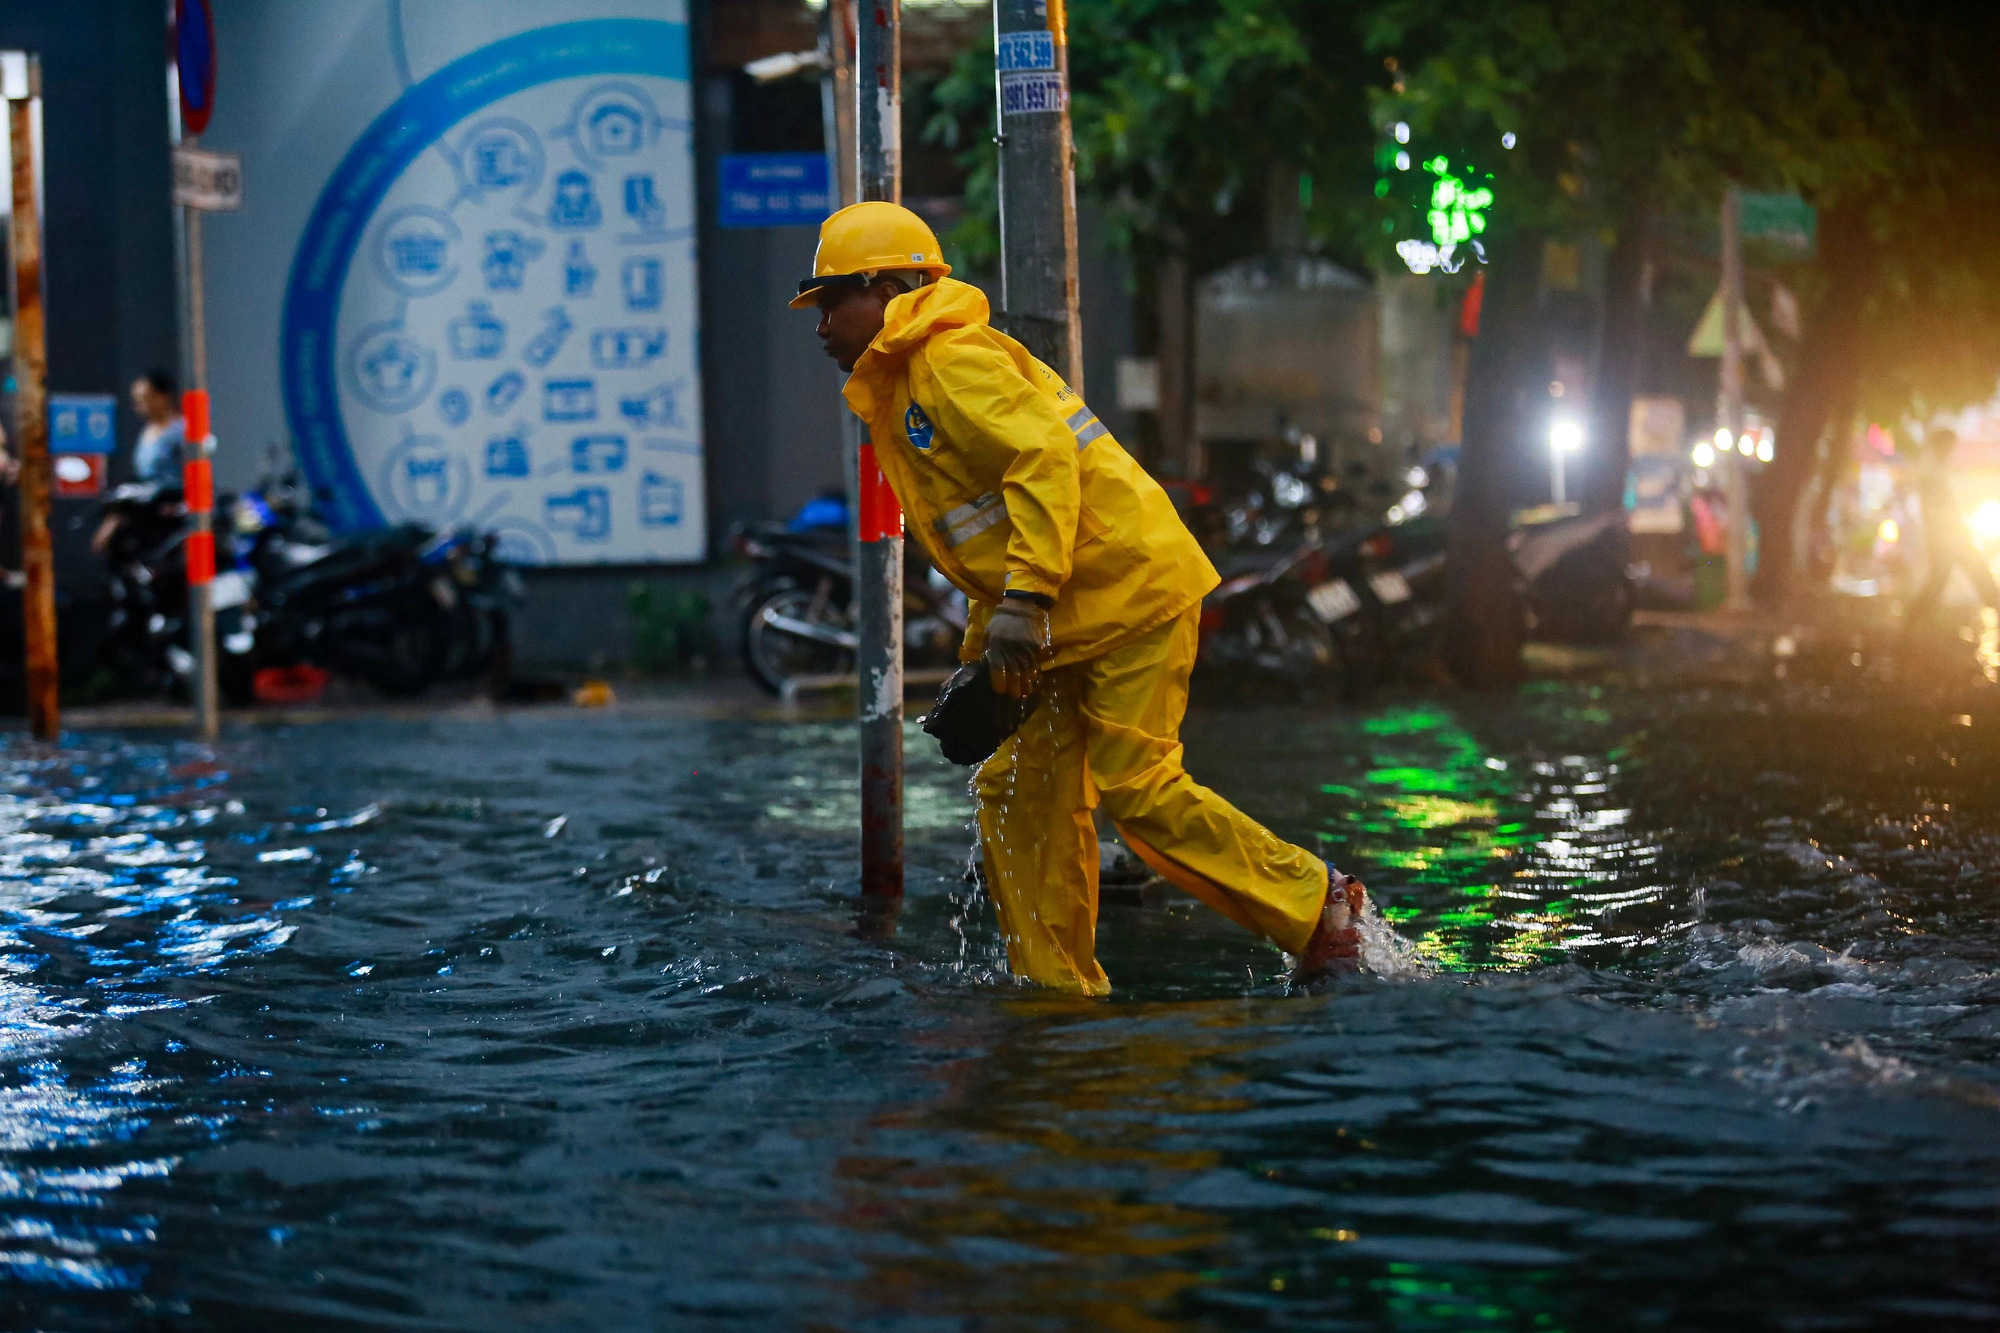 An employee of Ho Chi Minh City Urban Drainage Company removes a stone from a clogged manhole on Quoc Huong Street in Thao Dien Ward, Thu Duc City under Ho Chi Minh City, July 3, 2024. Photo: Chau Tuan / Tuoi Tre